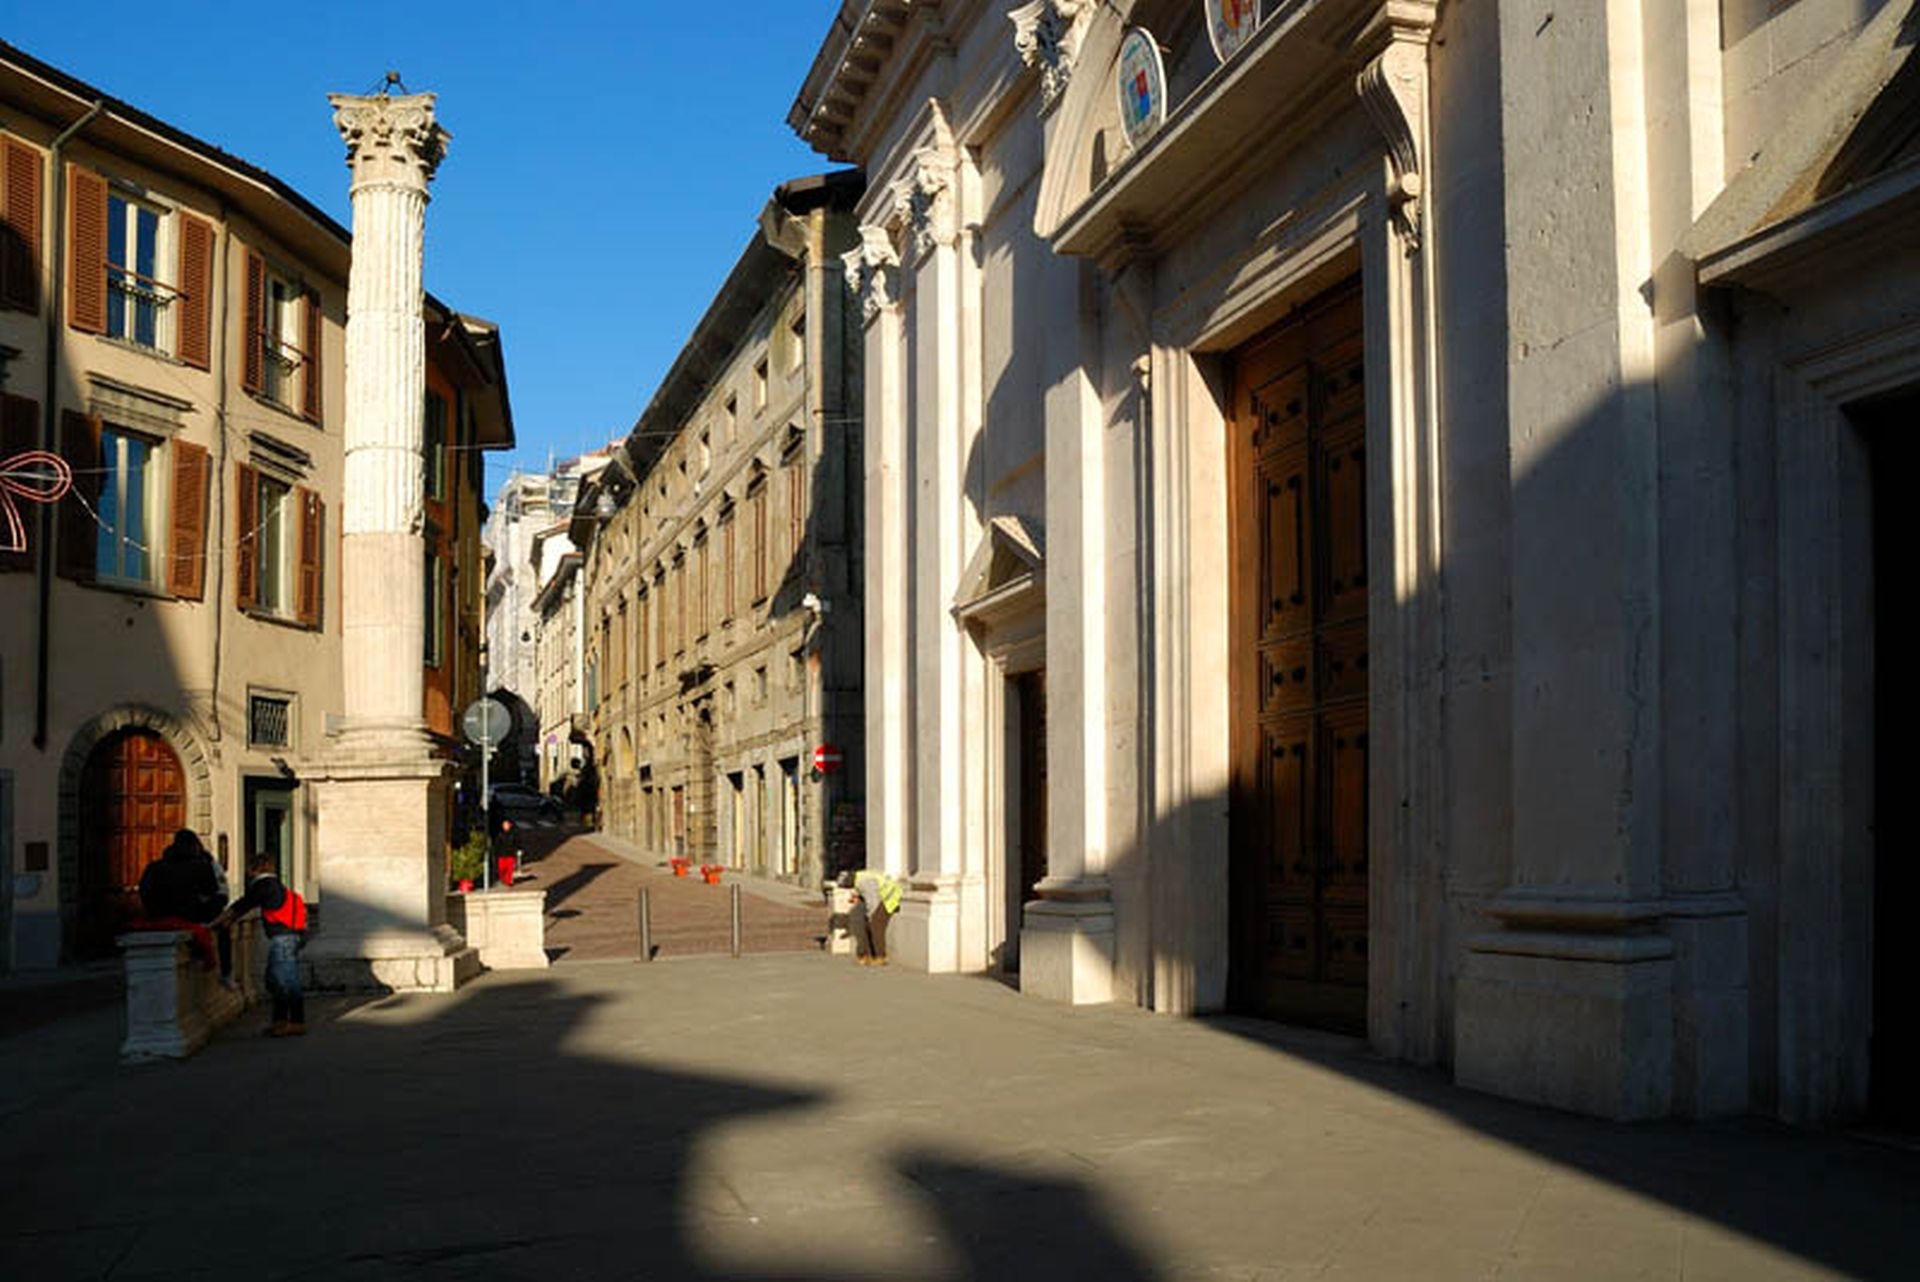 The Basilica of St. Alexander in Colonna